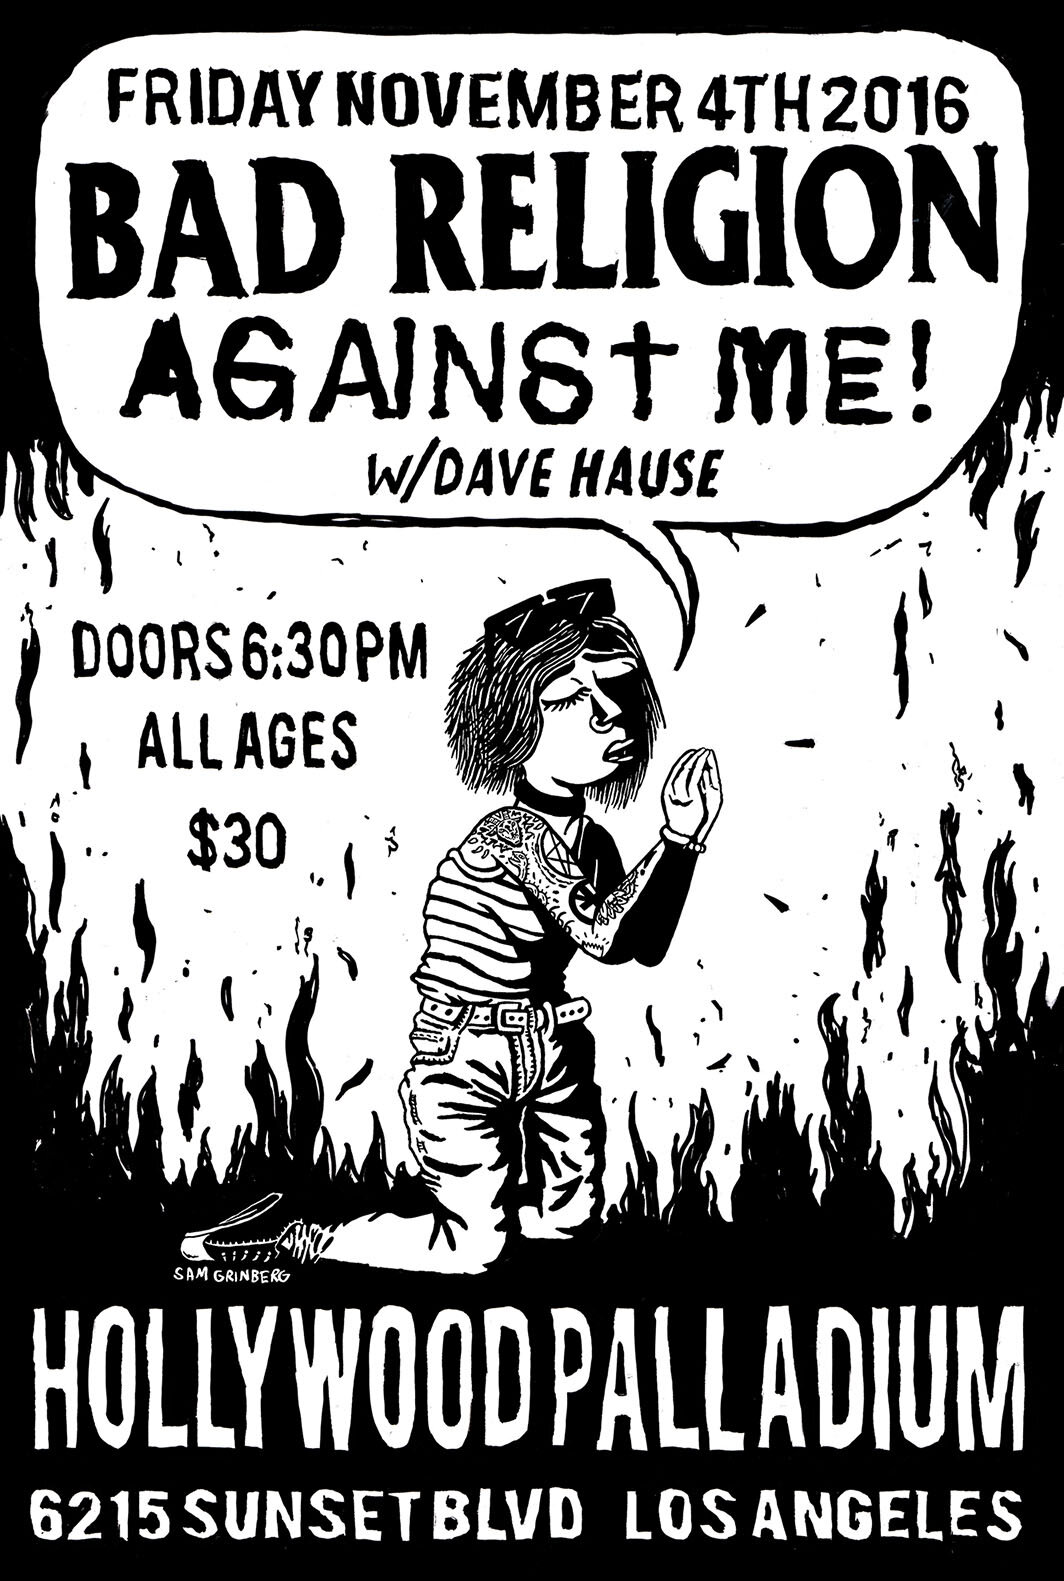  Flyer for  Bad Religion / Against Me!  tour at Hollywood Palladium, screenprinted flyers printed for first 100 guests 